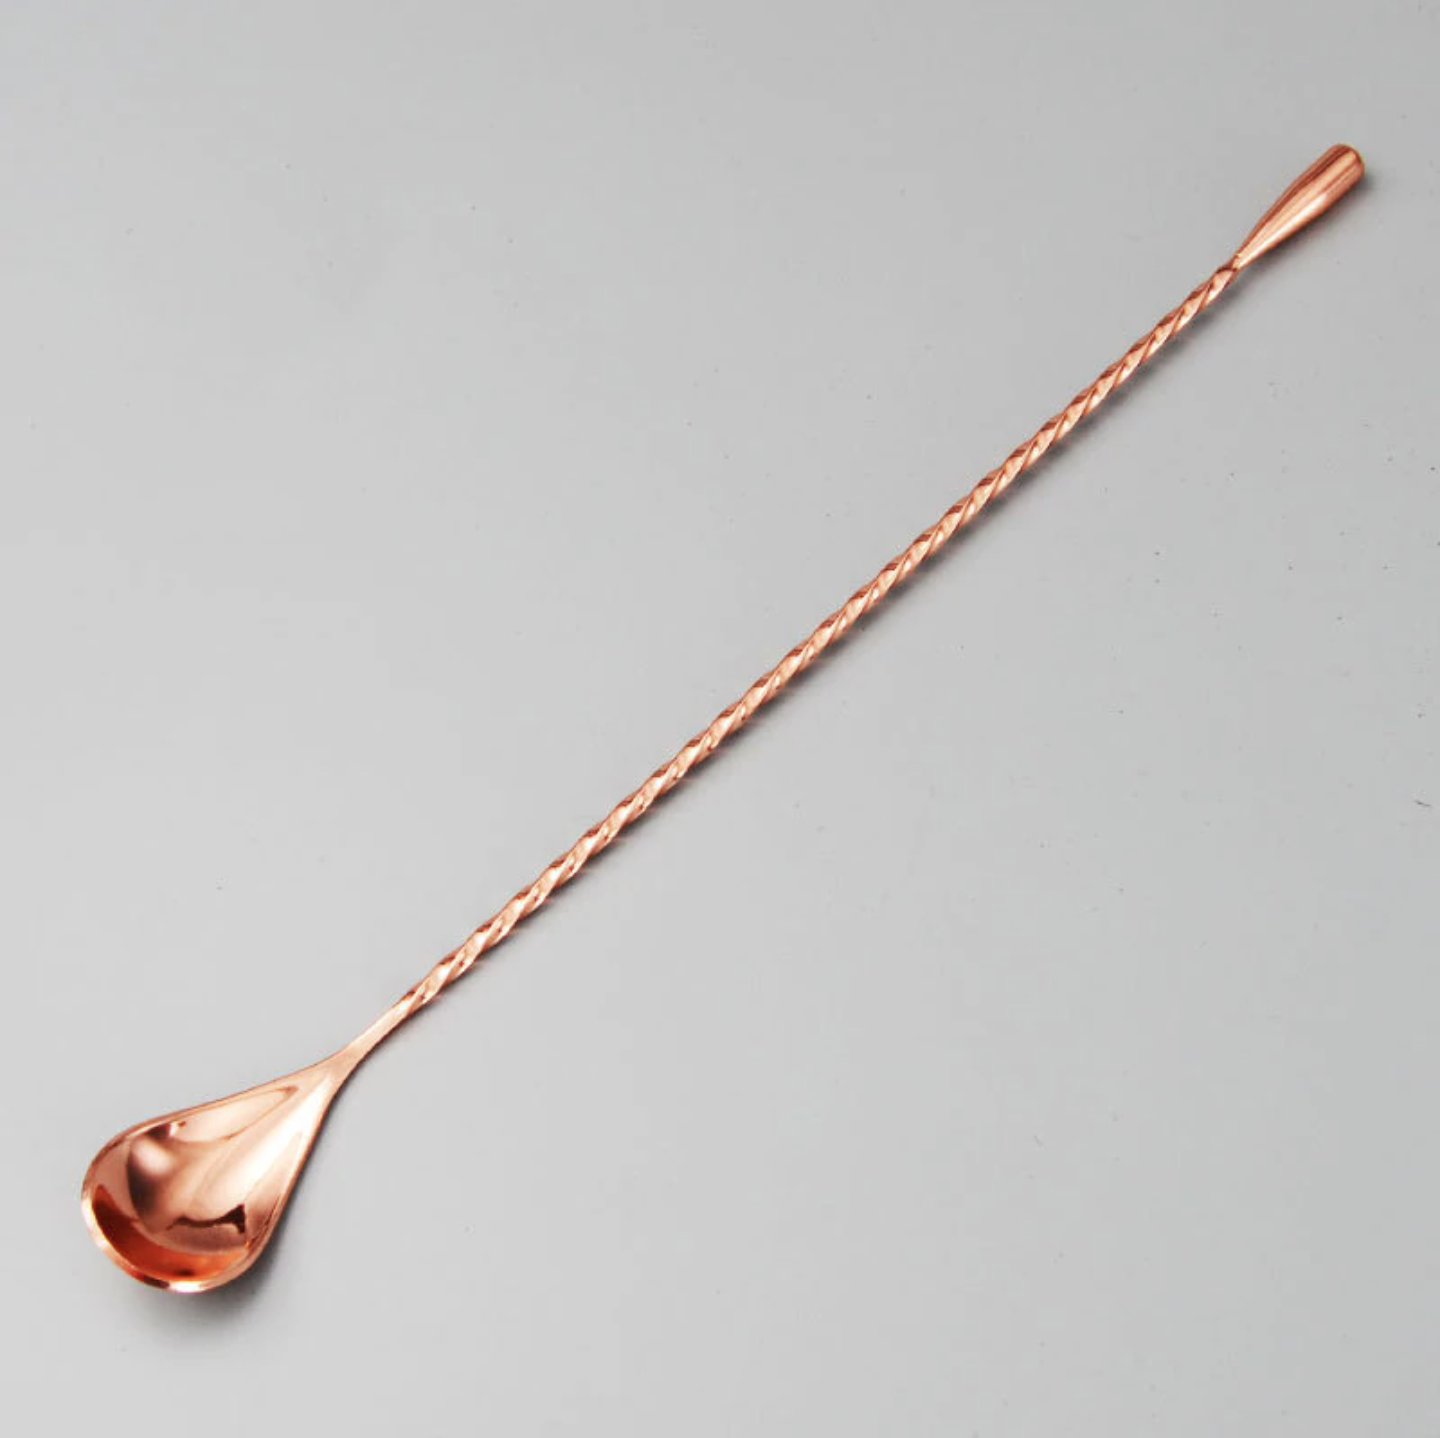 Cocktail Stainless Steel Spoon